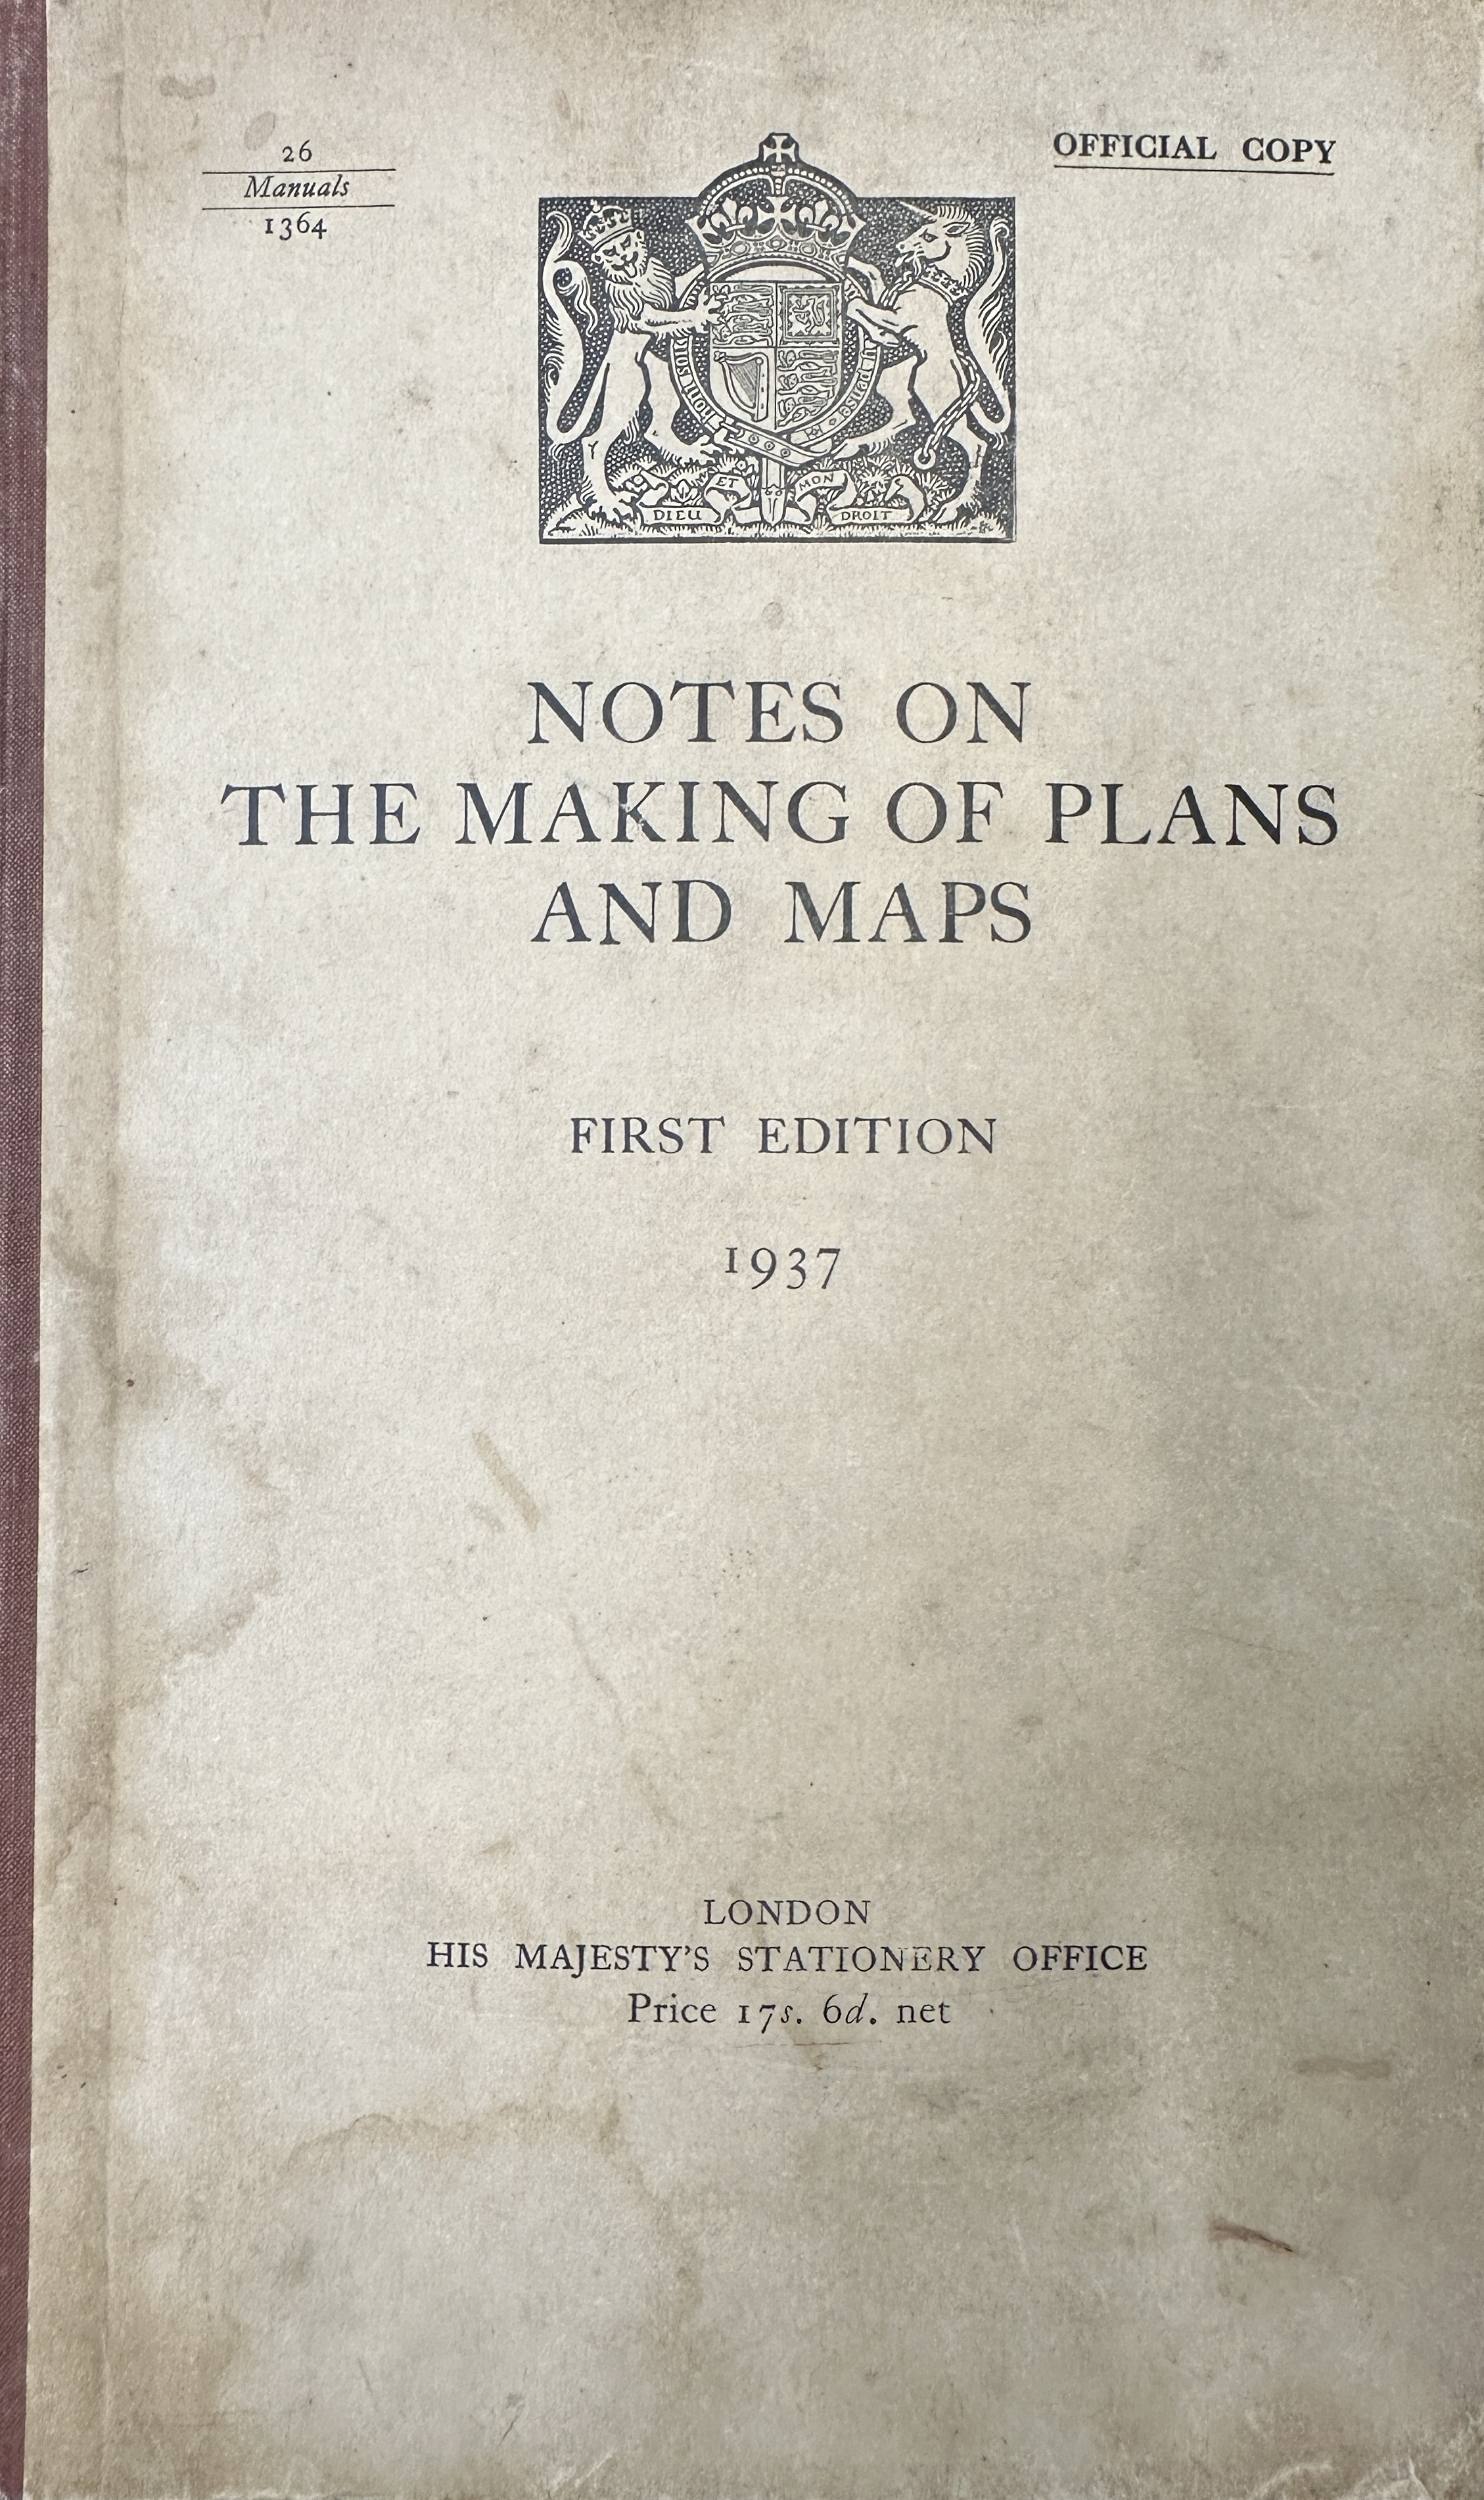 Books: Cartography 'Notes on the Making of Plans and Maps' first edition, 1937, published by the